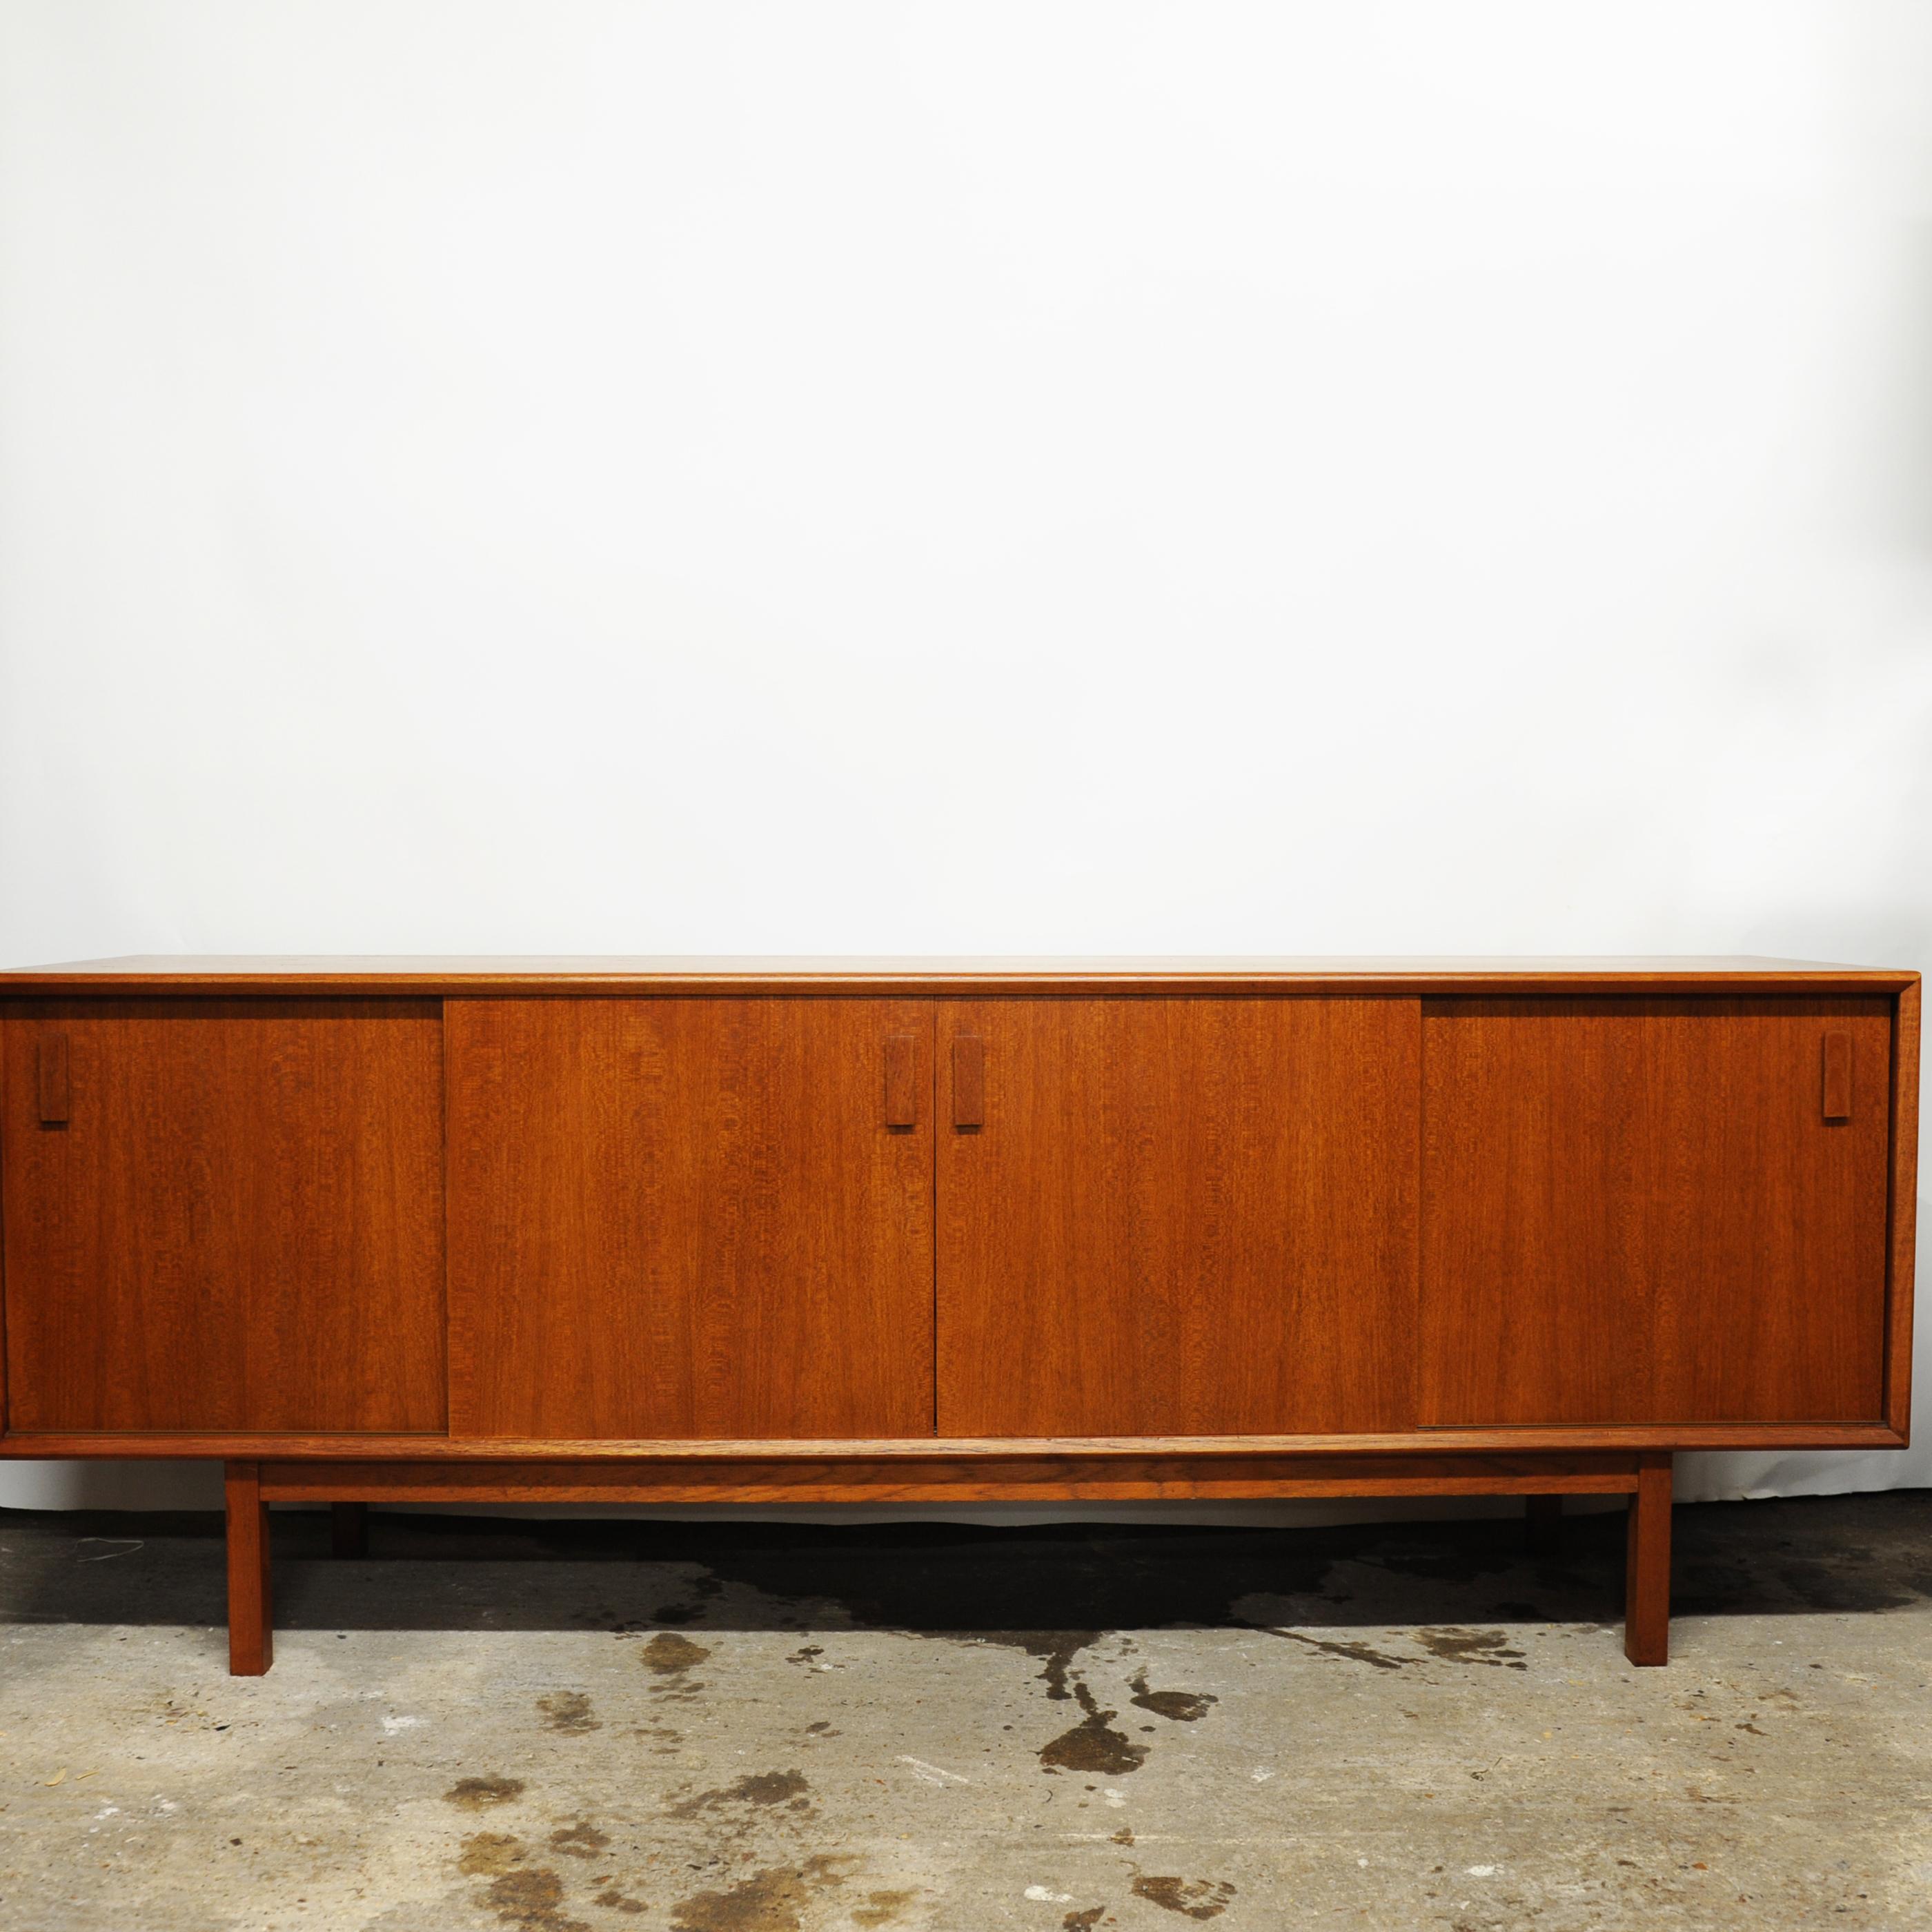 A vintage teak sliding door sideboard with inner decorative drawers and shelves.

Manufacturer - Unknown

Design Period - 1960 to 1969

Country of Manufacture - Denmark

Style - Mid-Century

Detailed Condition - Good with minimal